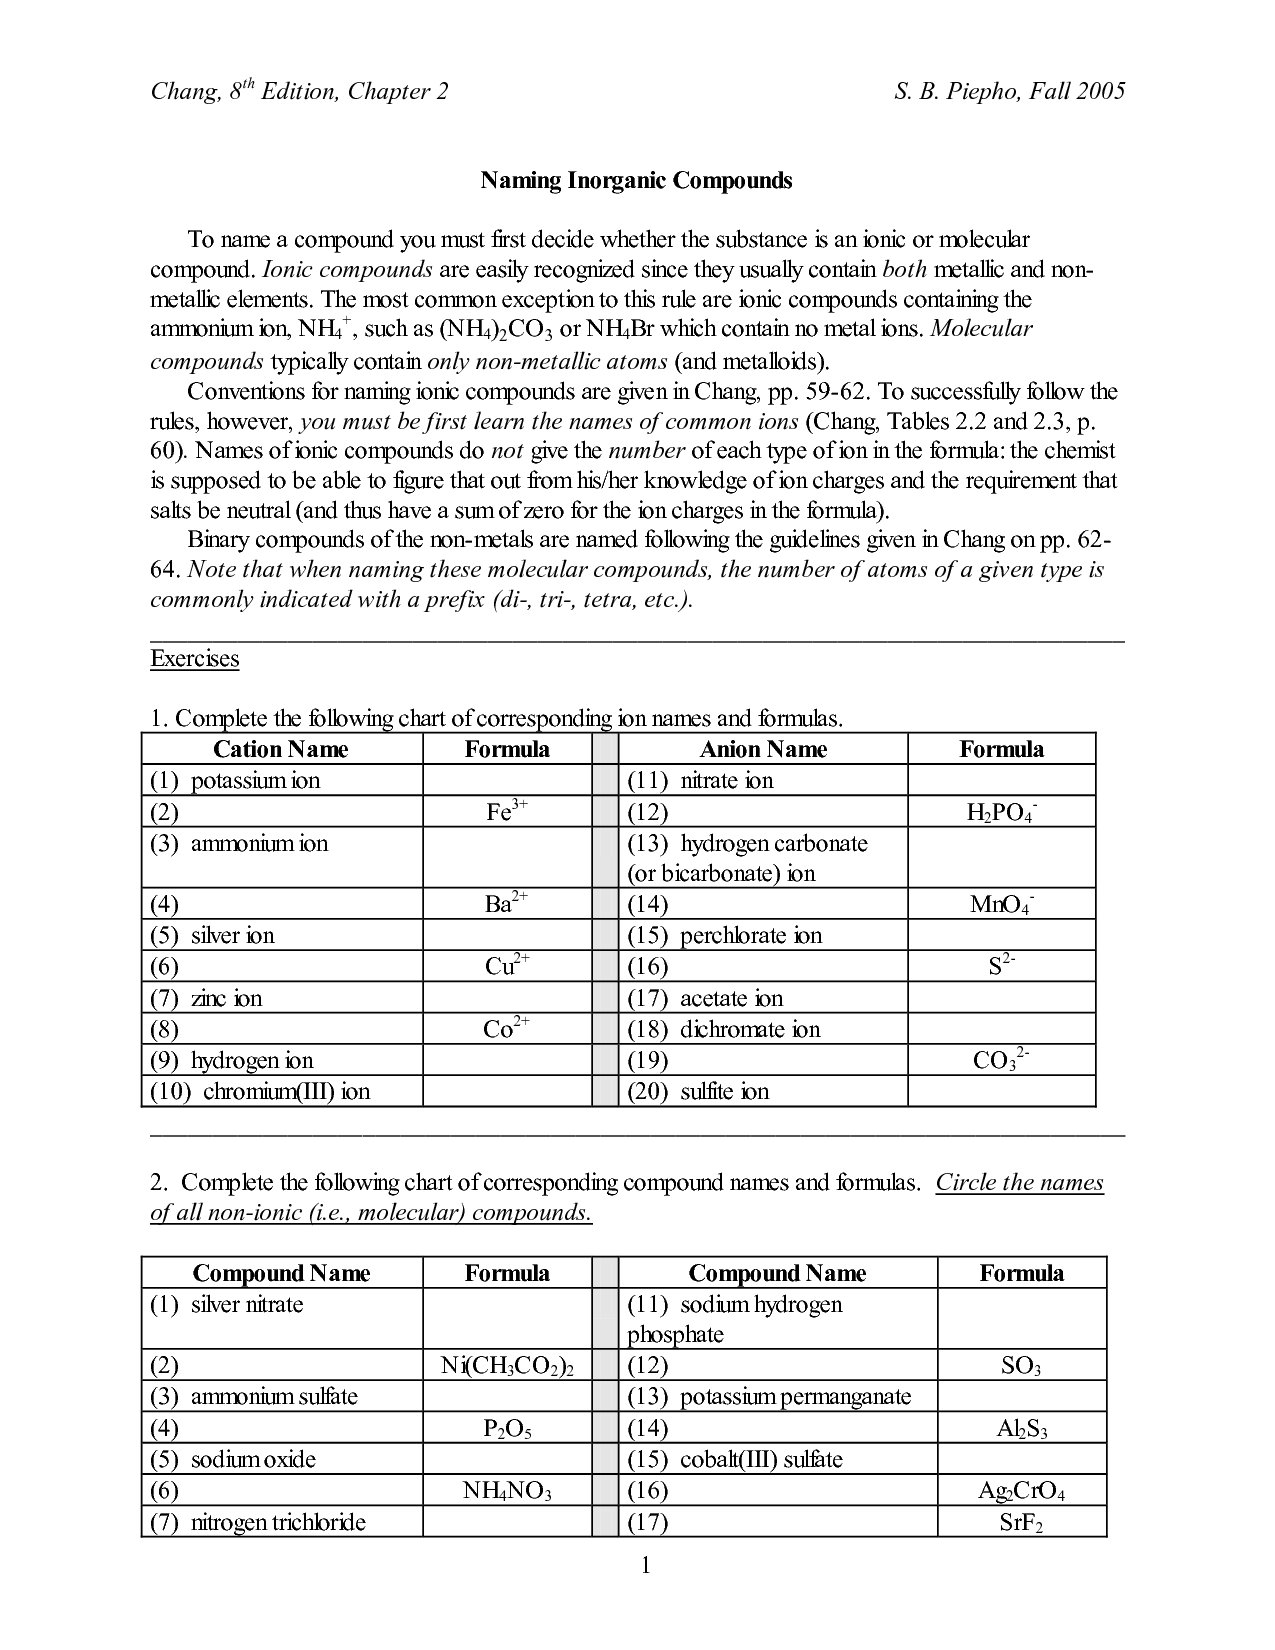 10-best-images-of-binary-ionic-compounds-worksheet-naming-binary-compounds-worksheet-naming